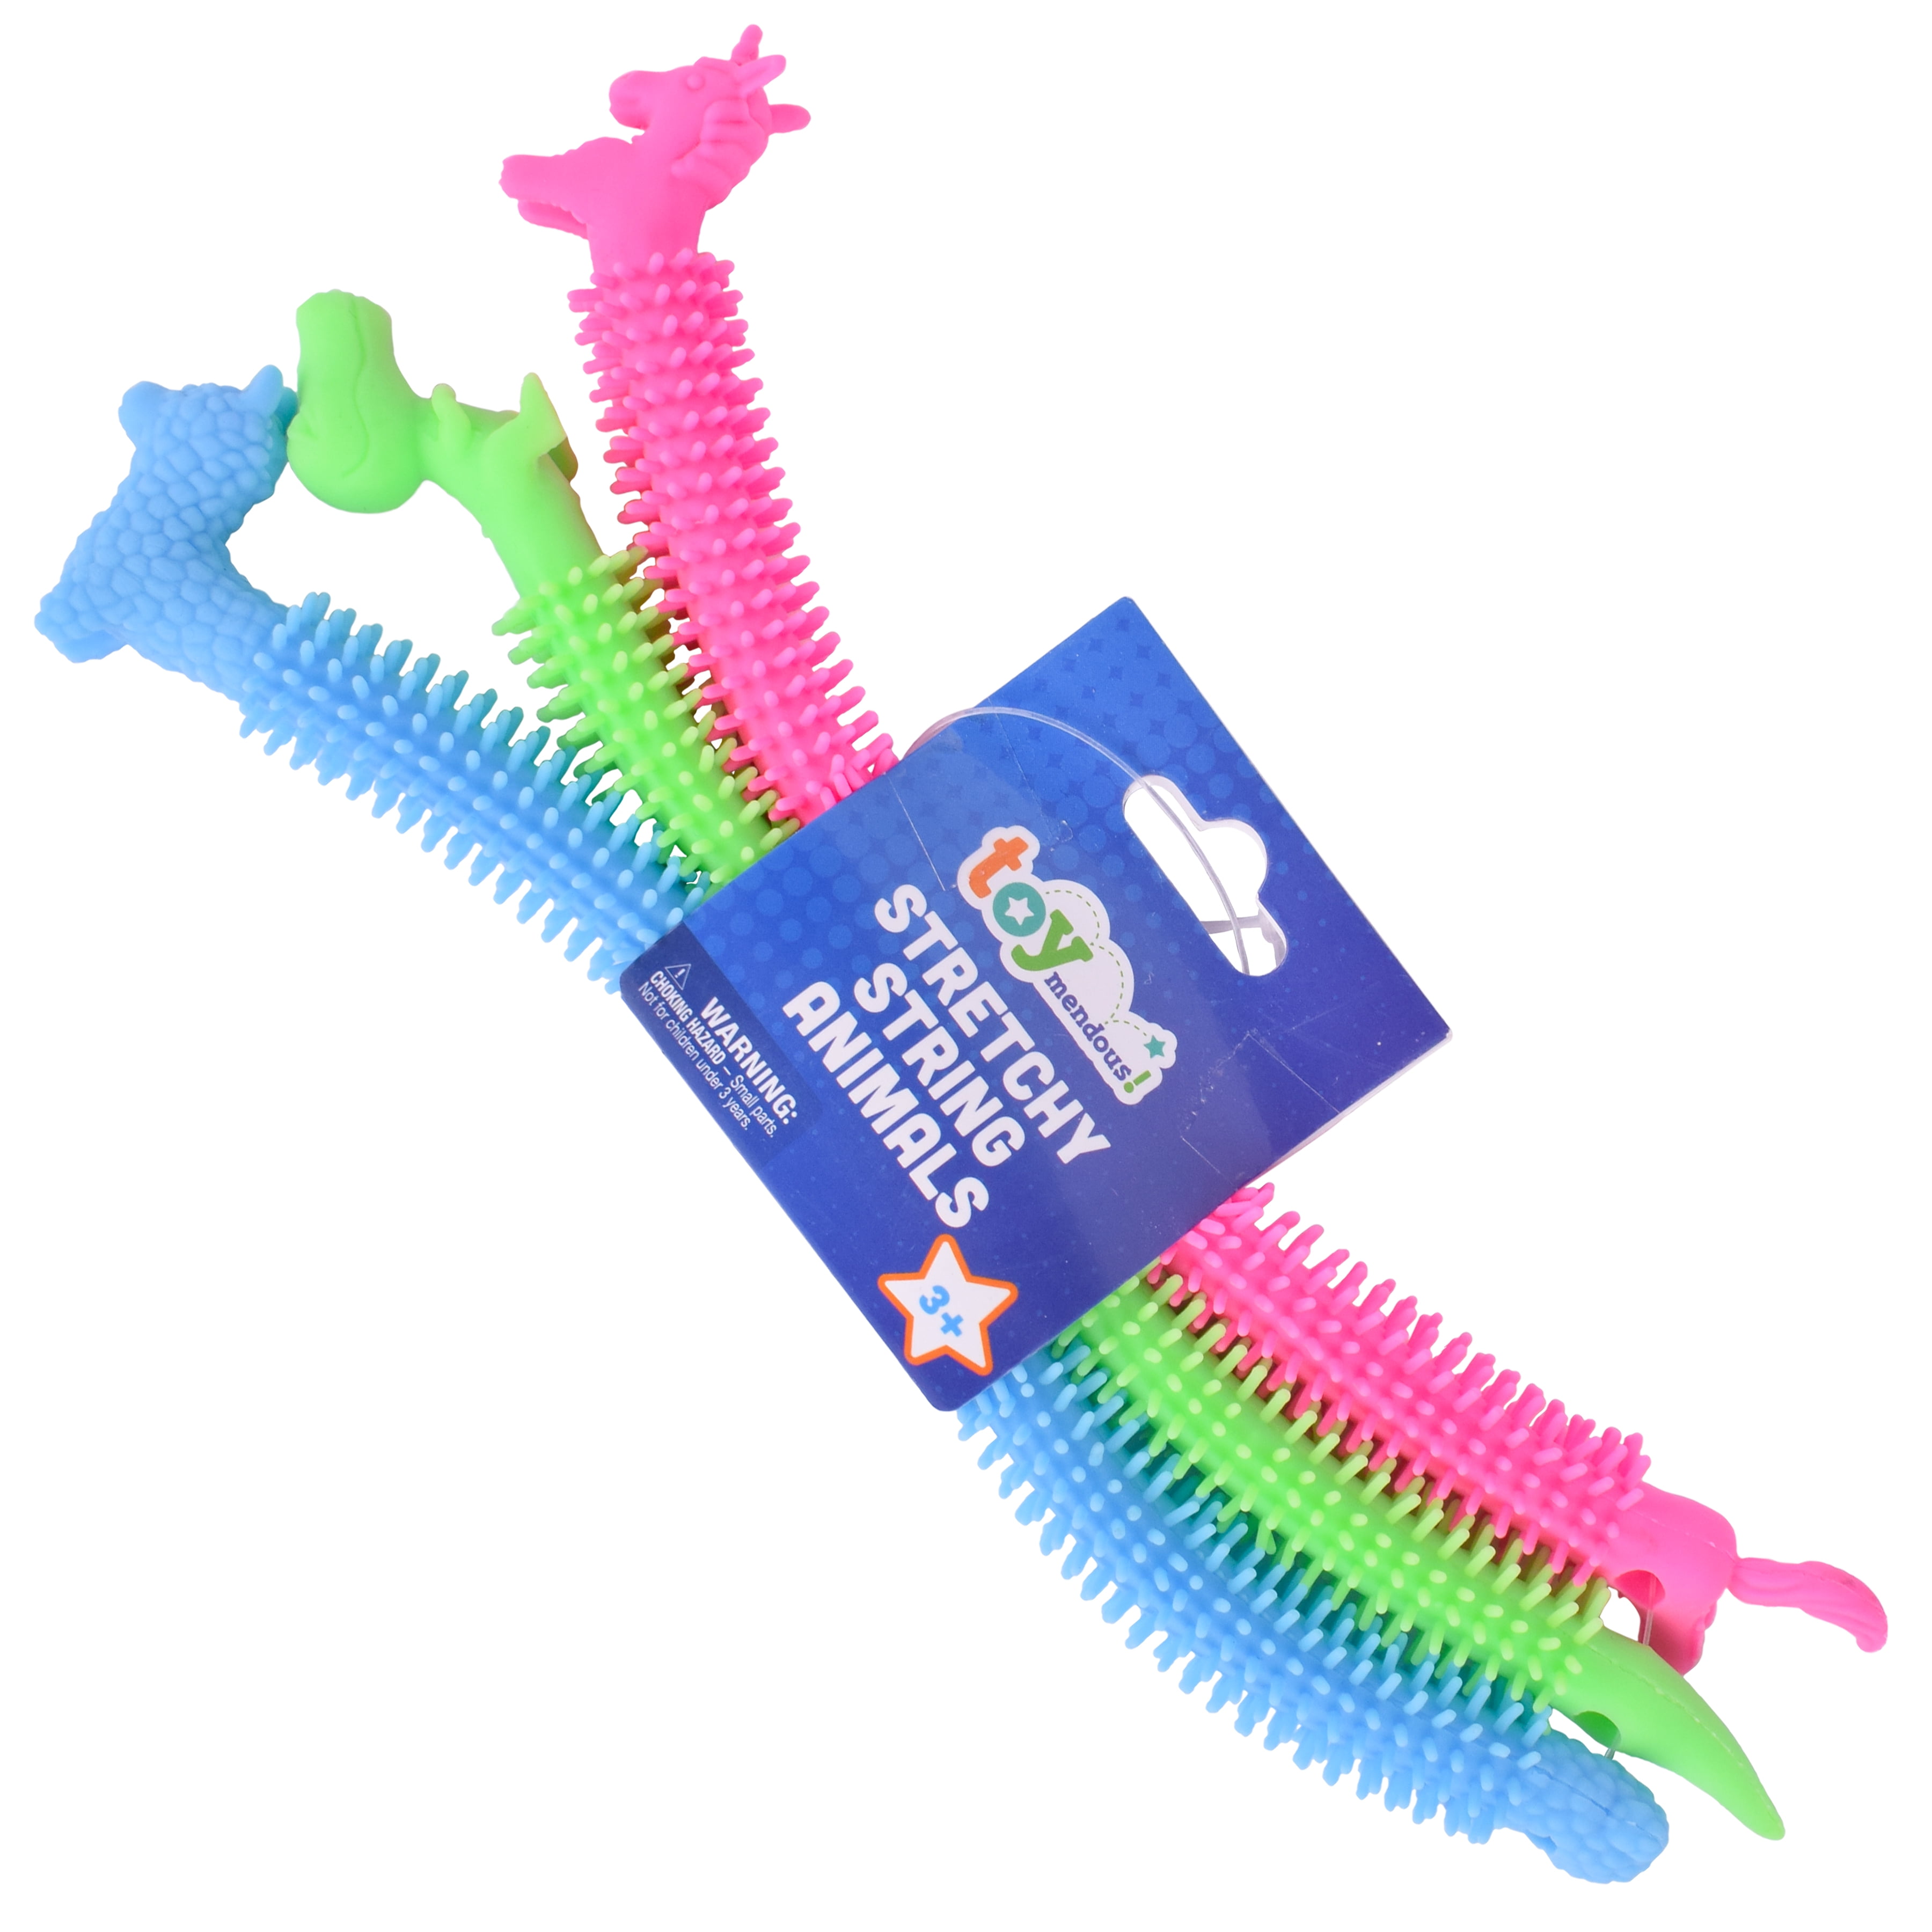 Toymendous Stretch Creatures - 3 Textured Stretchy String Fidget Sensory Toys, Pink Green Blue | Ages Kids 3+